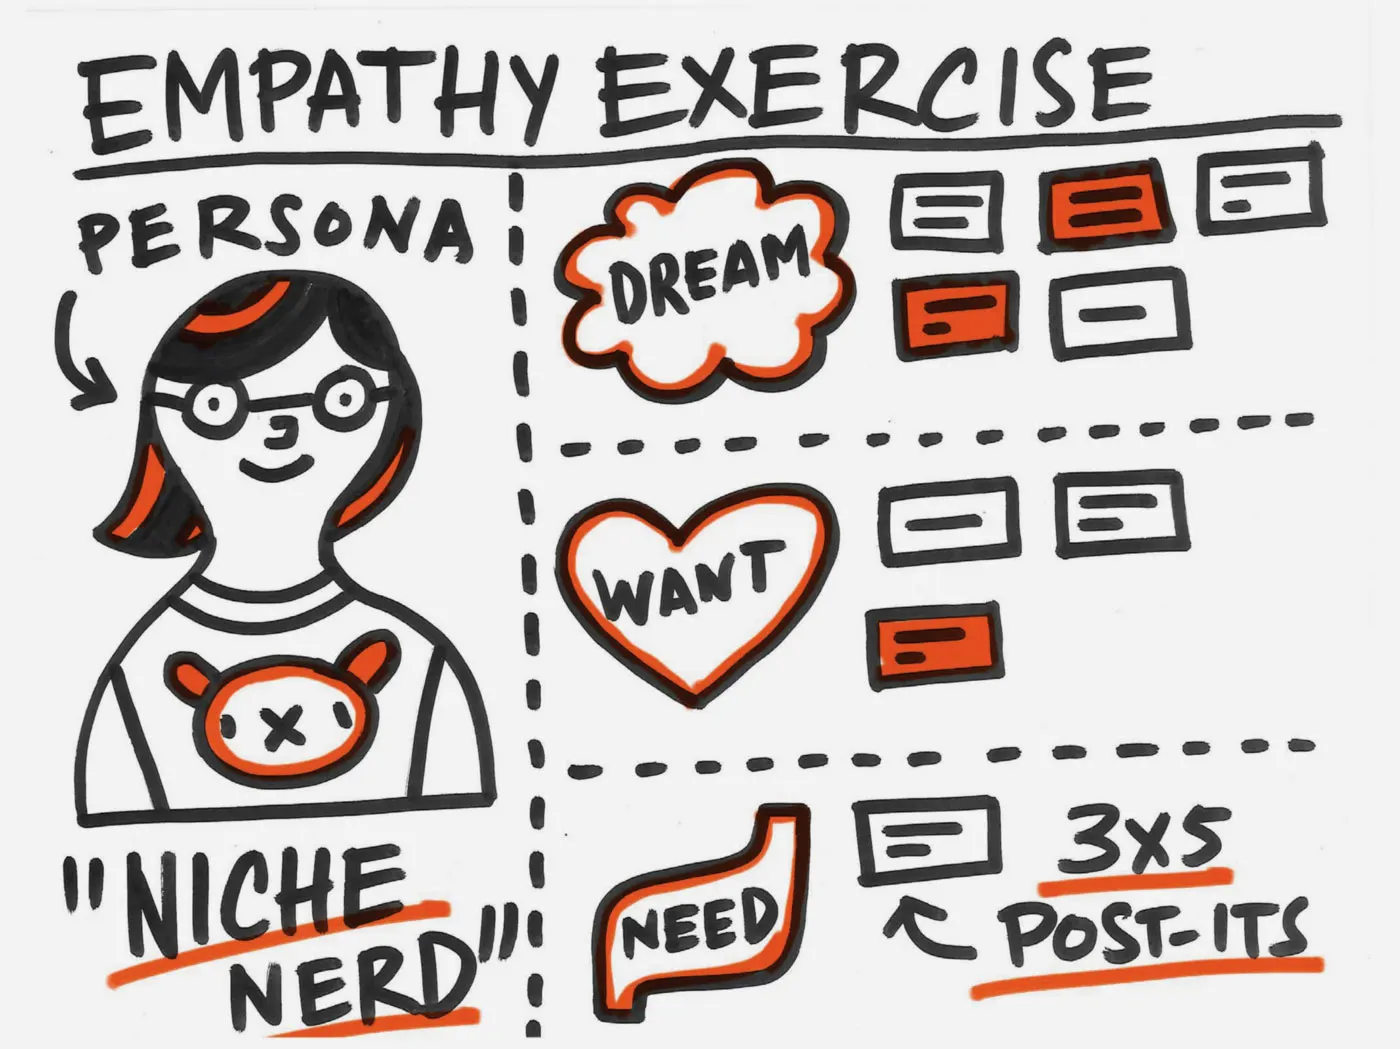 Black marker sketch with the heading "Empathy Exercise" and word/image pairings underneath: Persona: Niche Nerd. Dream. Want. Need 3 x 5 sticky notes.